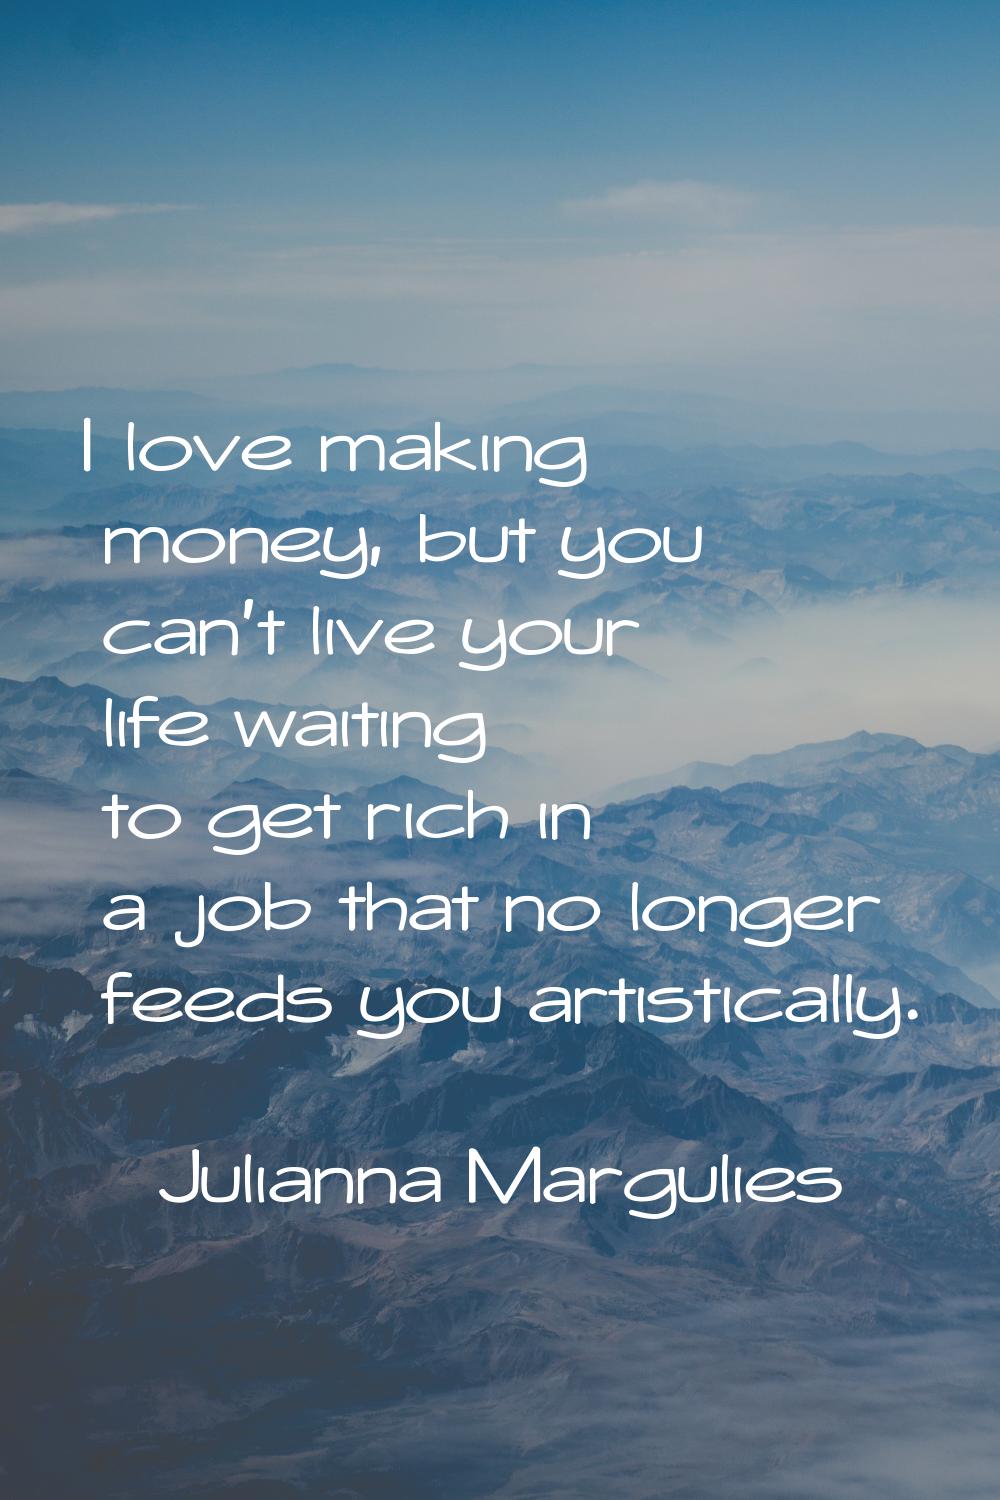 I love making money, but you can't live your life waiting to get rich in a job that no longer feeds